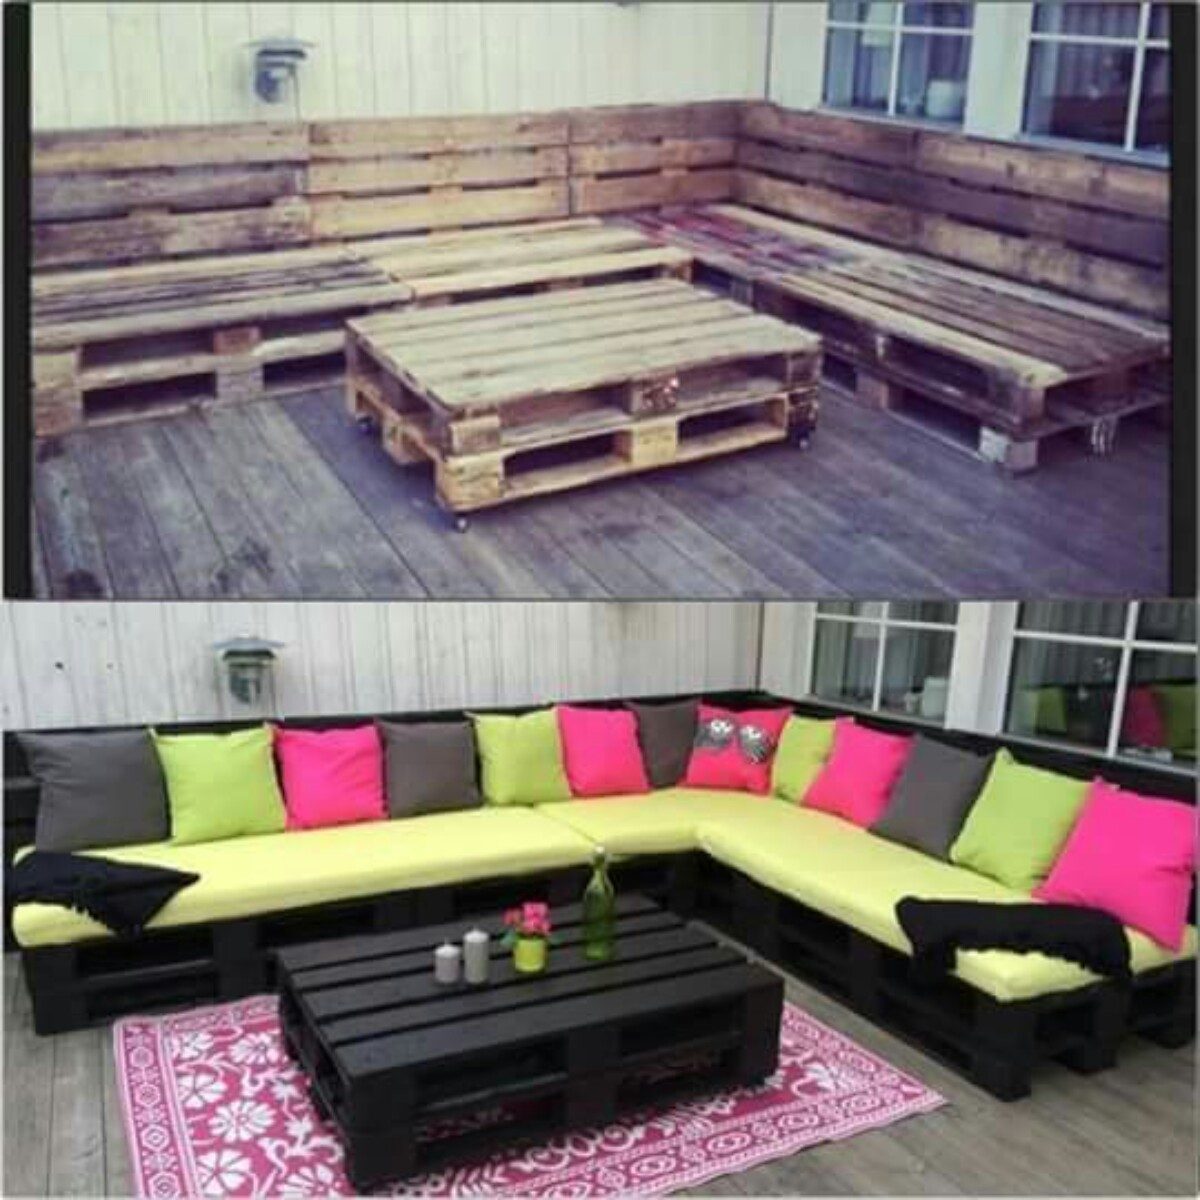 Outdoor Living Room DIY Patio Decoration and Table Set